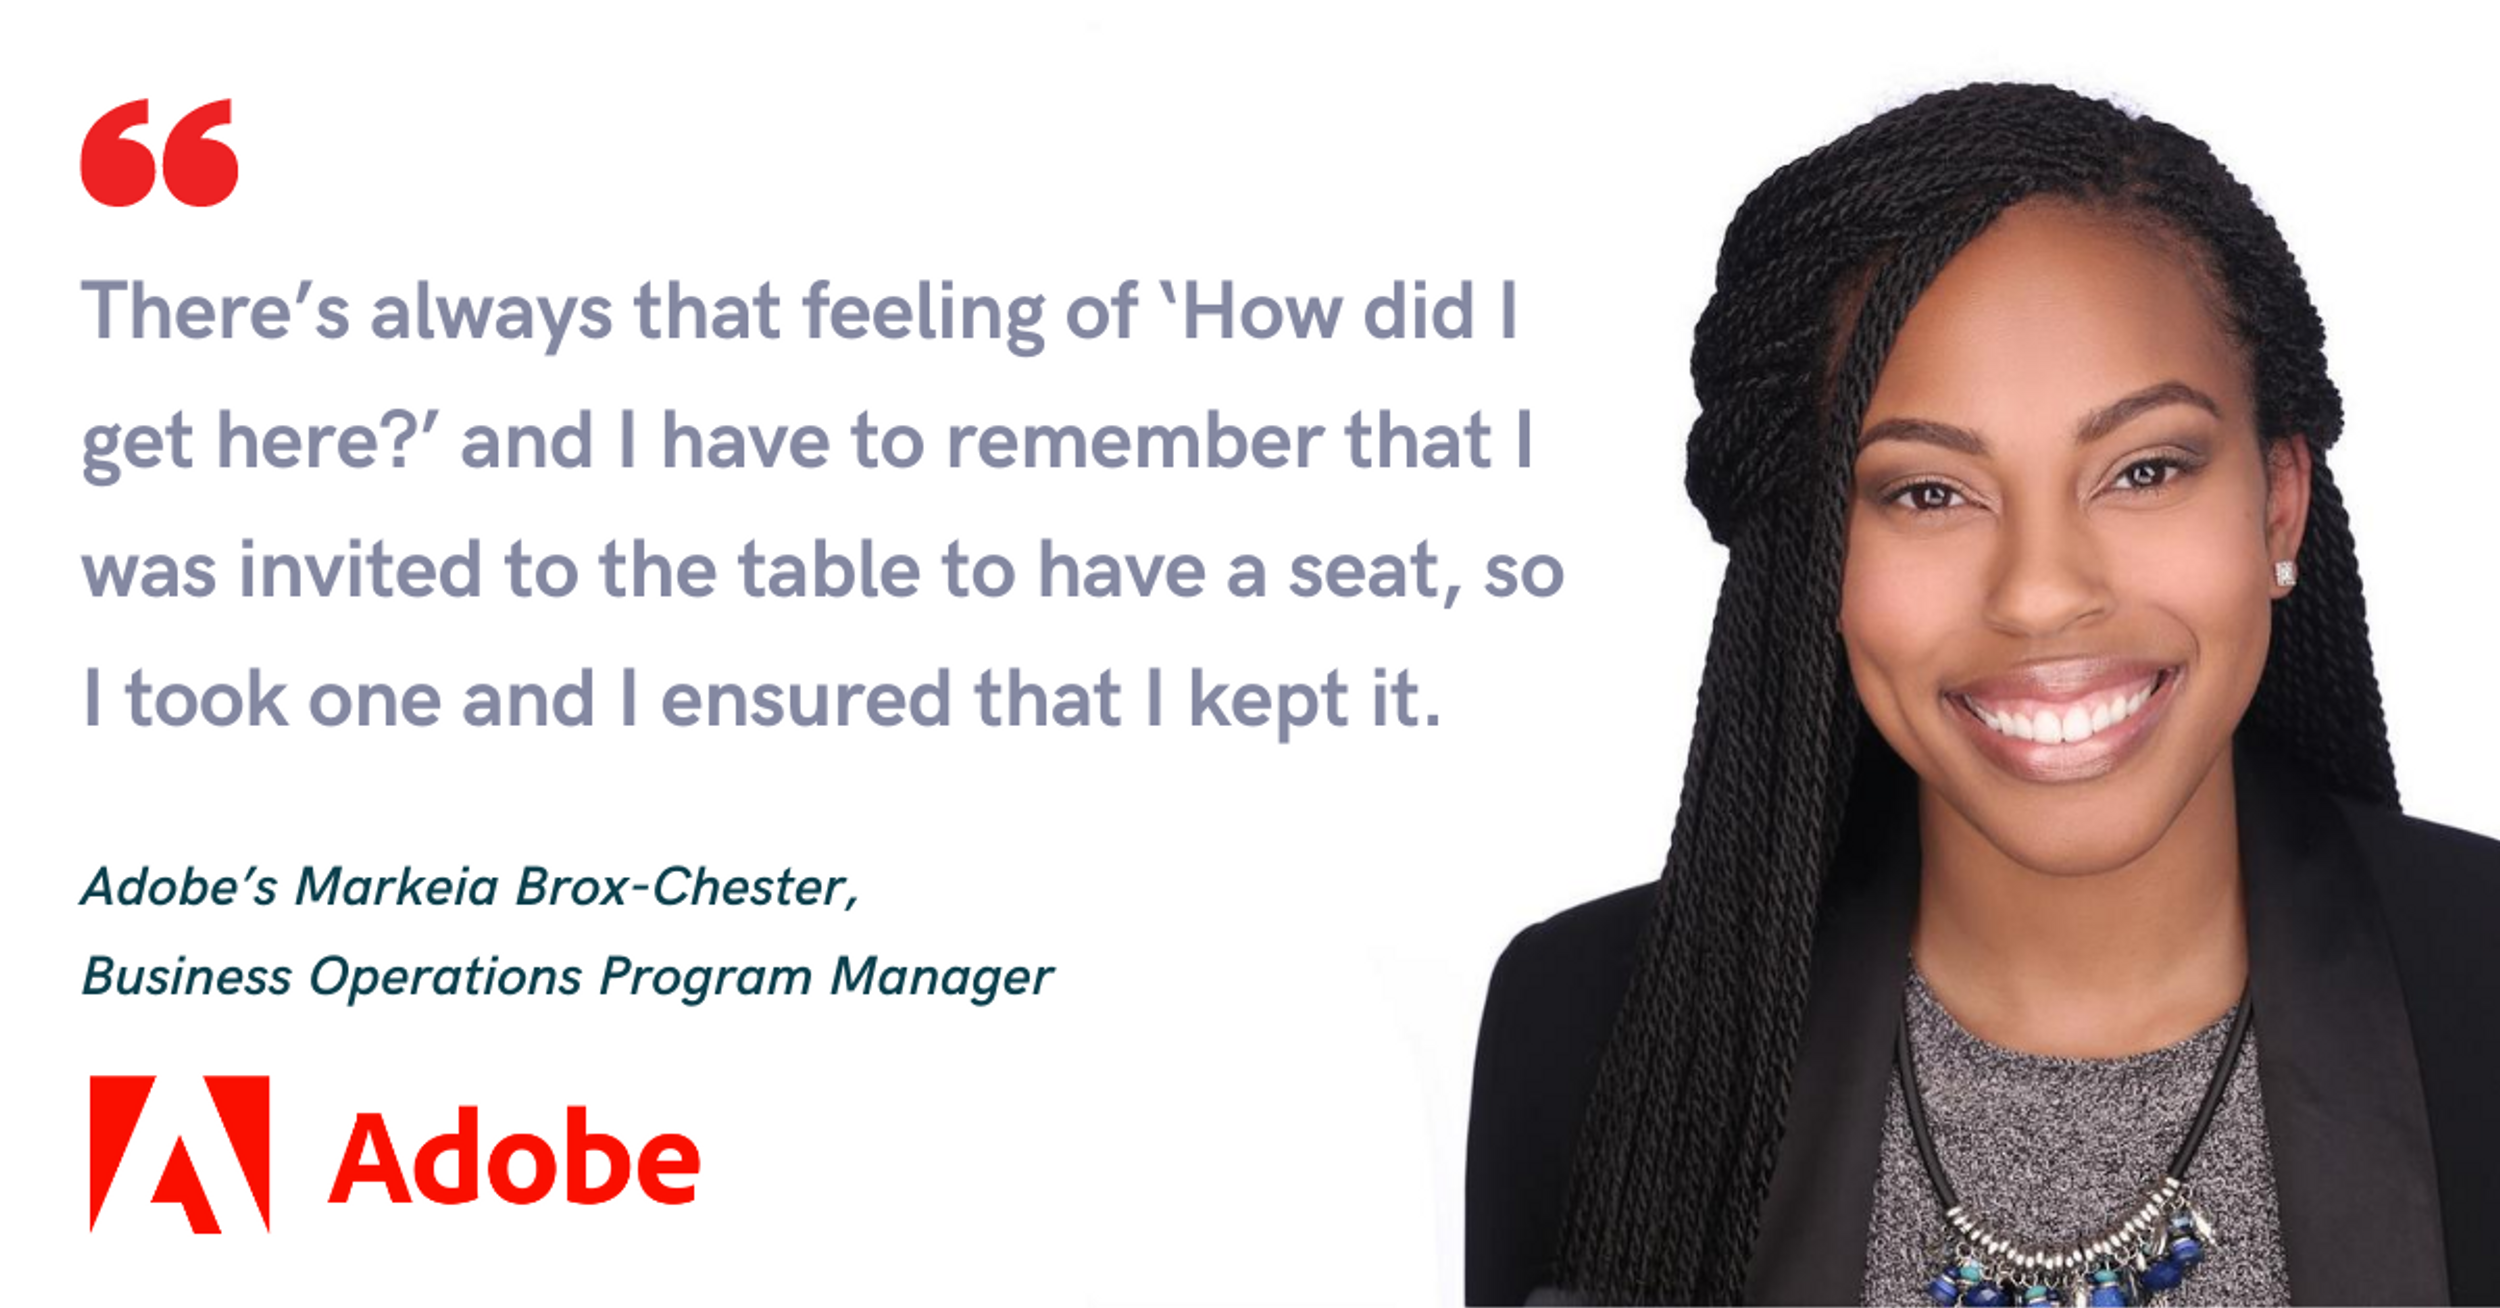 How to Use Your Voice to Find Career Success: Advice from Adobe’s Markeia Brox-Chester